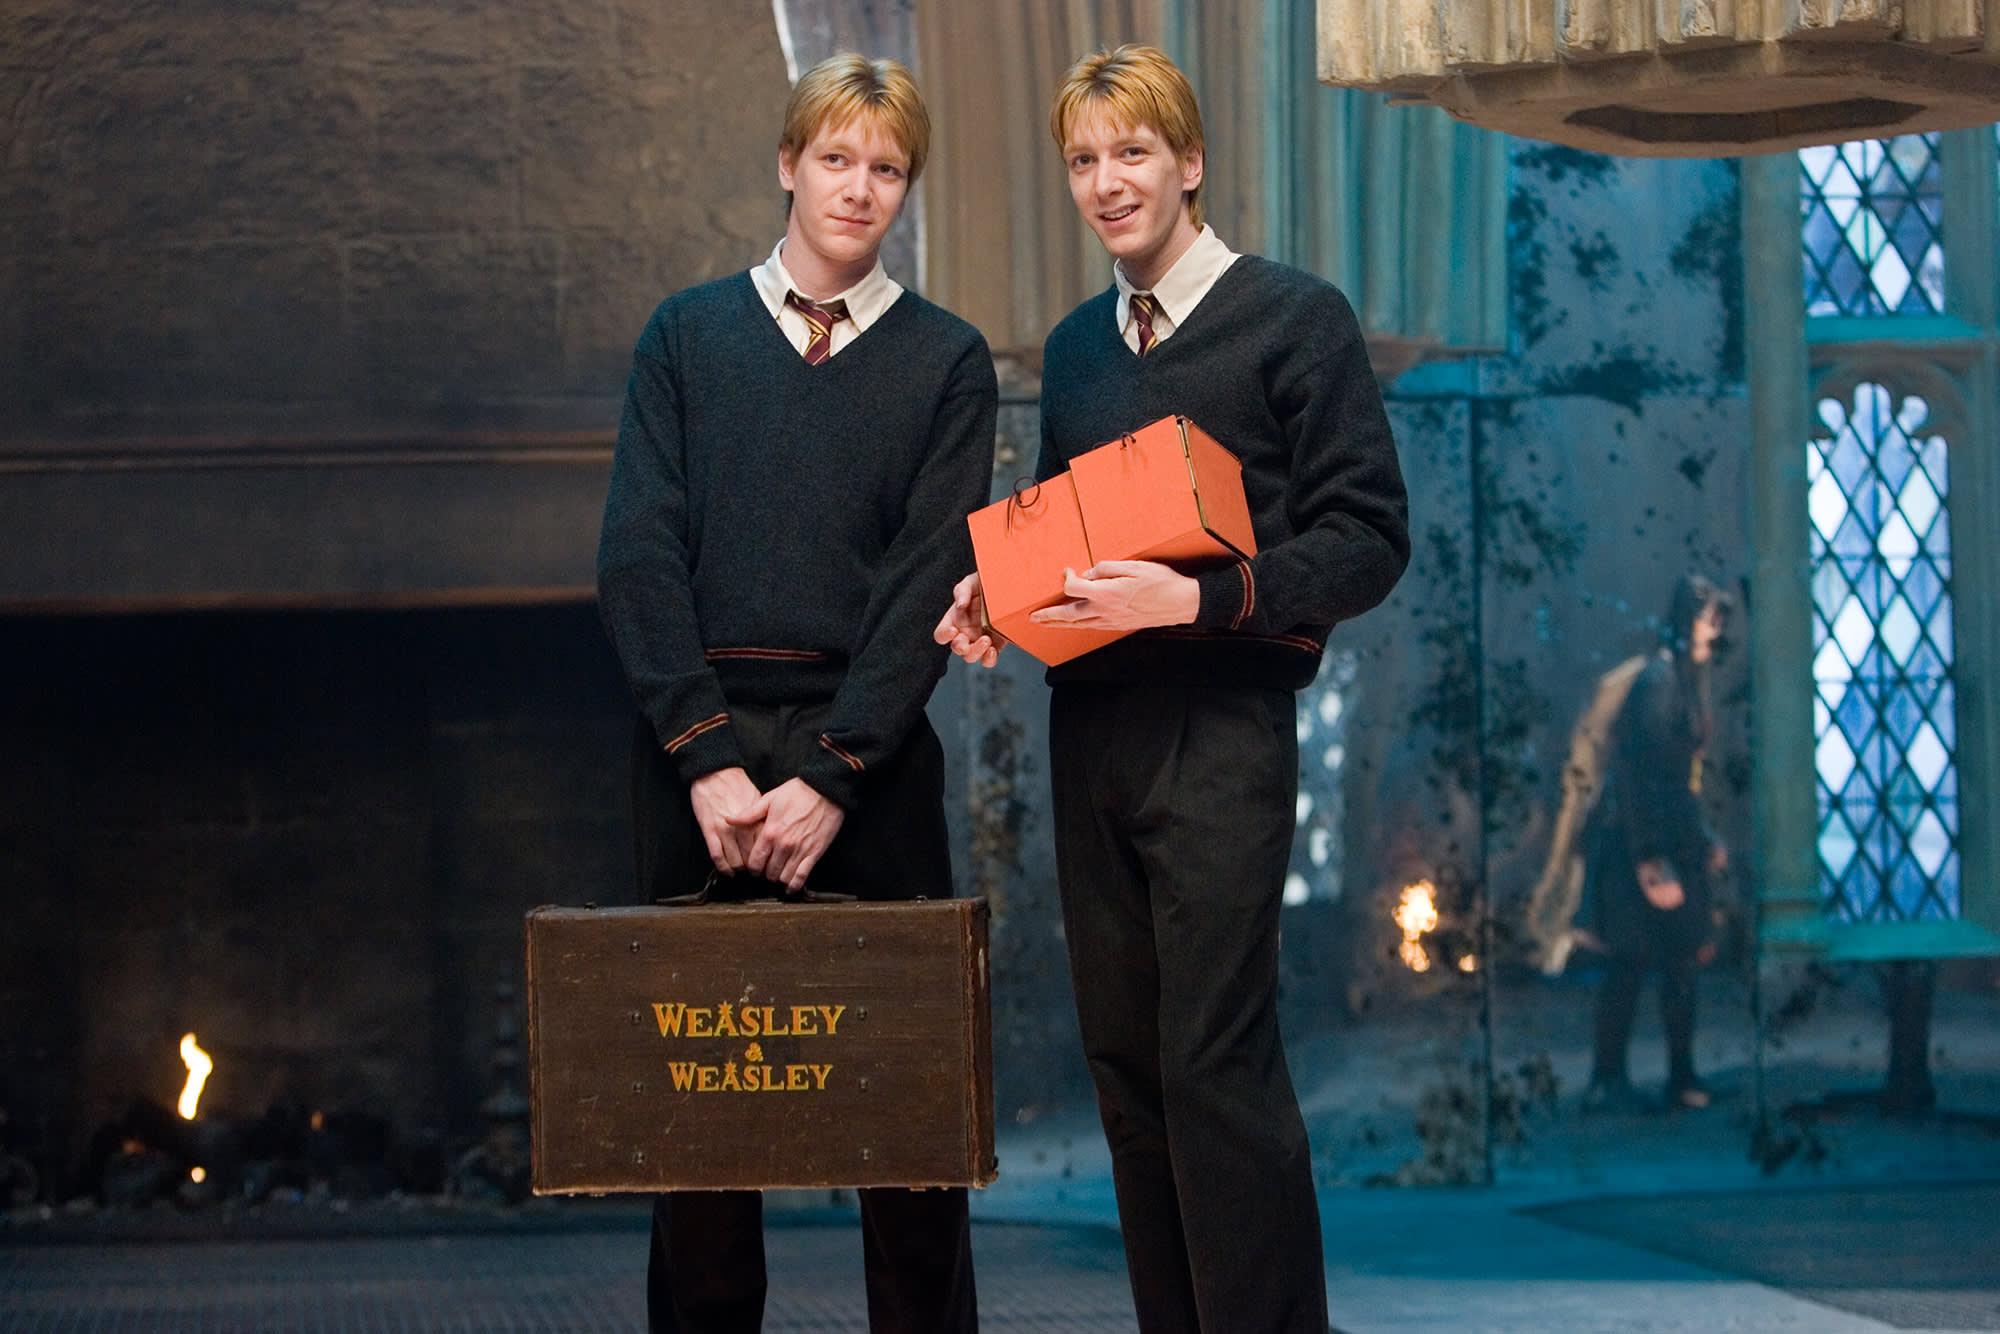 Fred and George Weasley standing in the Room of Requirement while holding a suitcase that says Weasley and Weasley and orange packages.